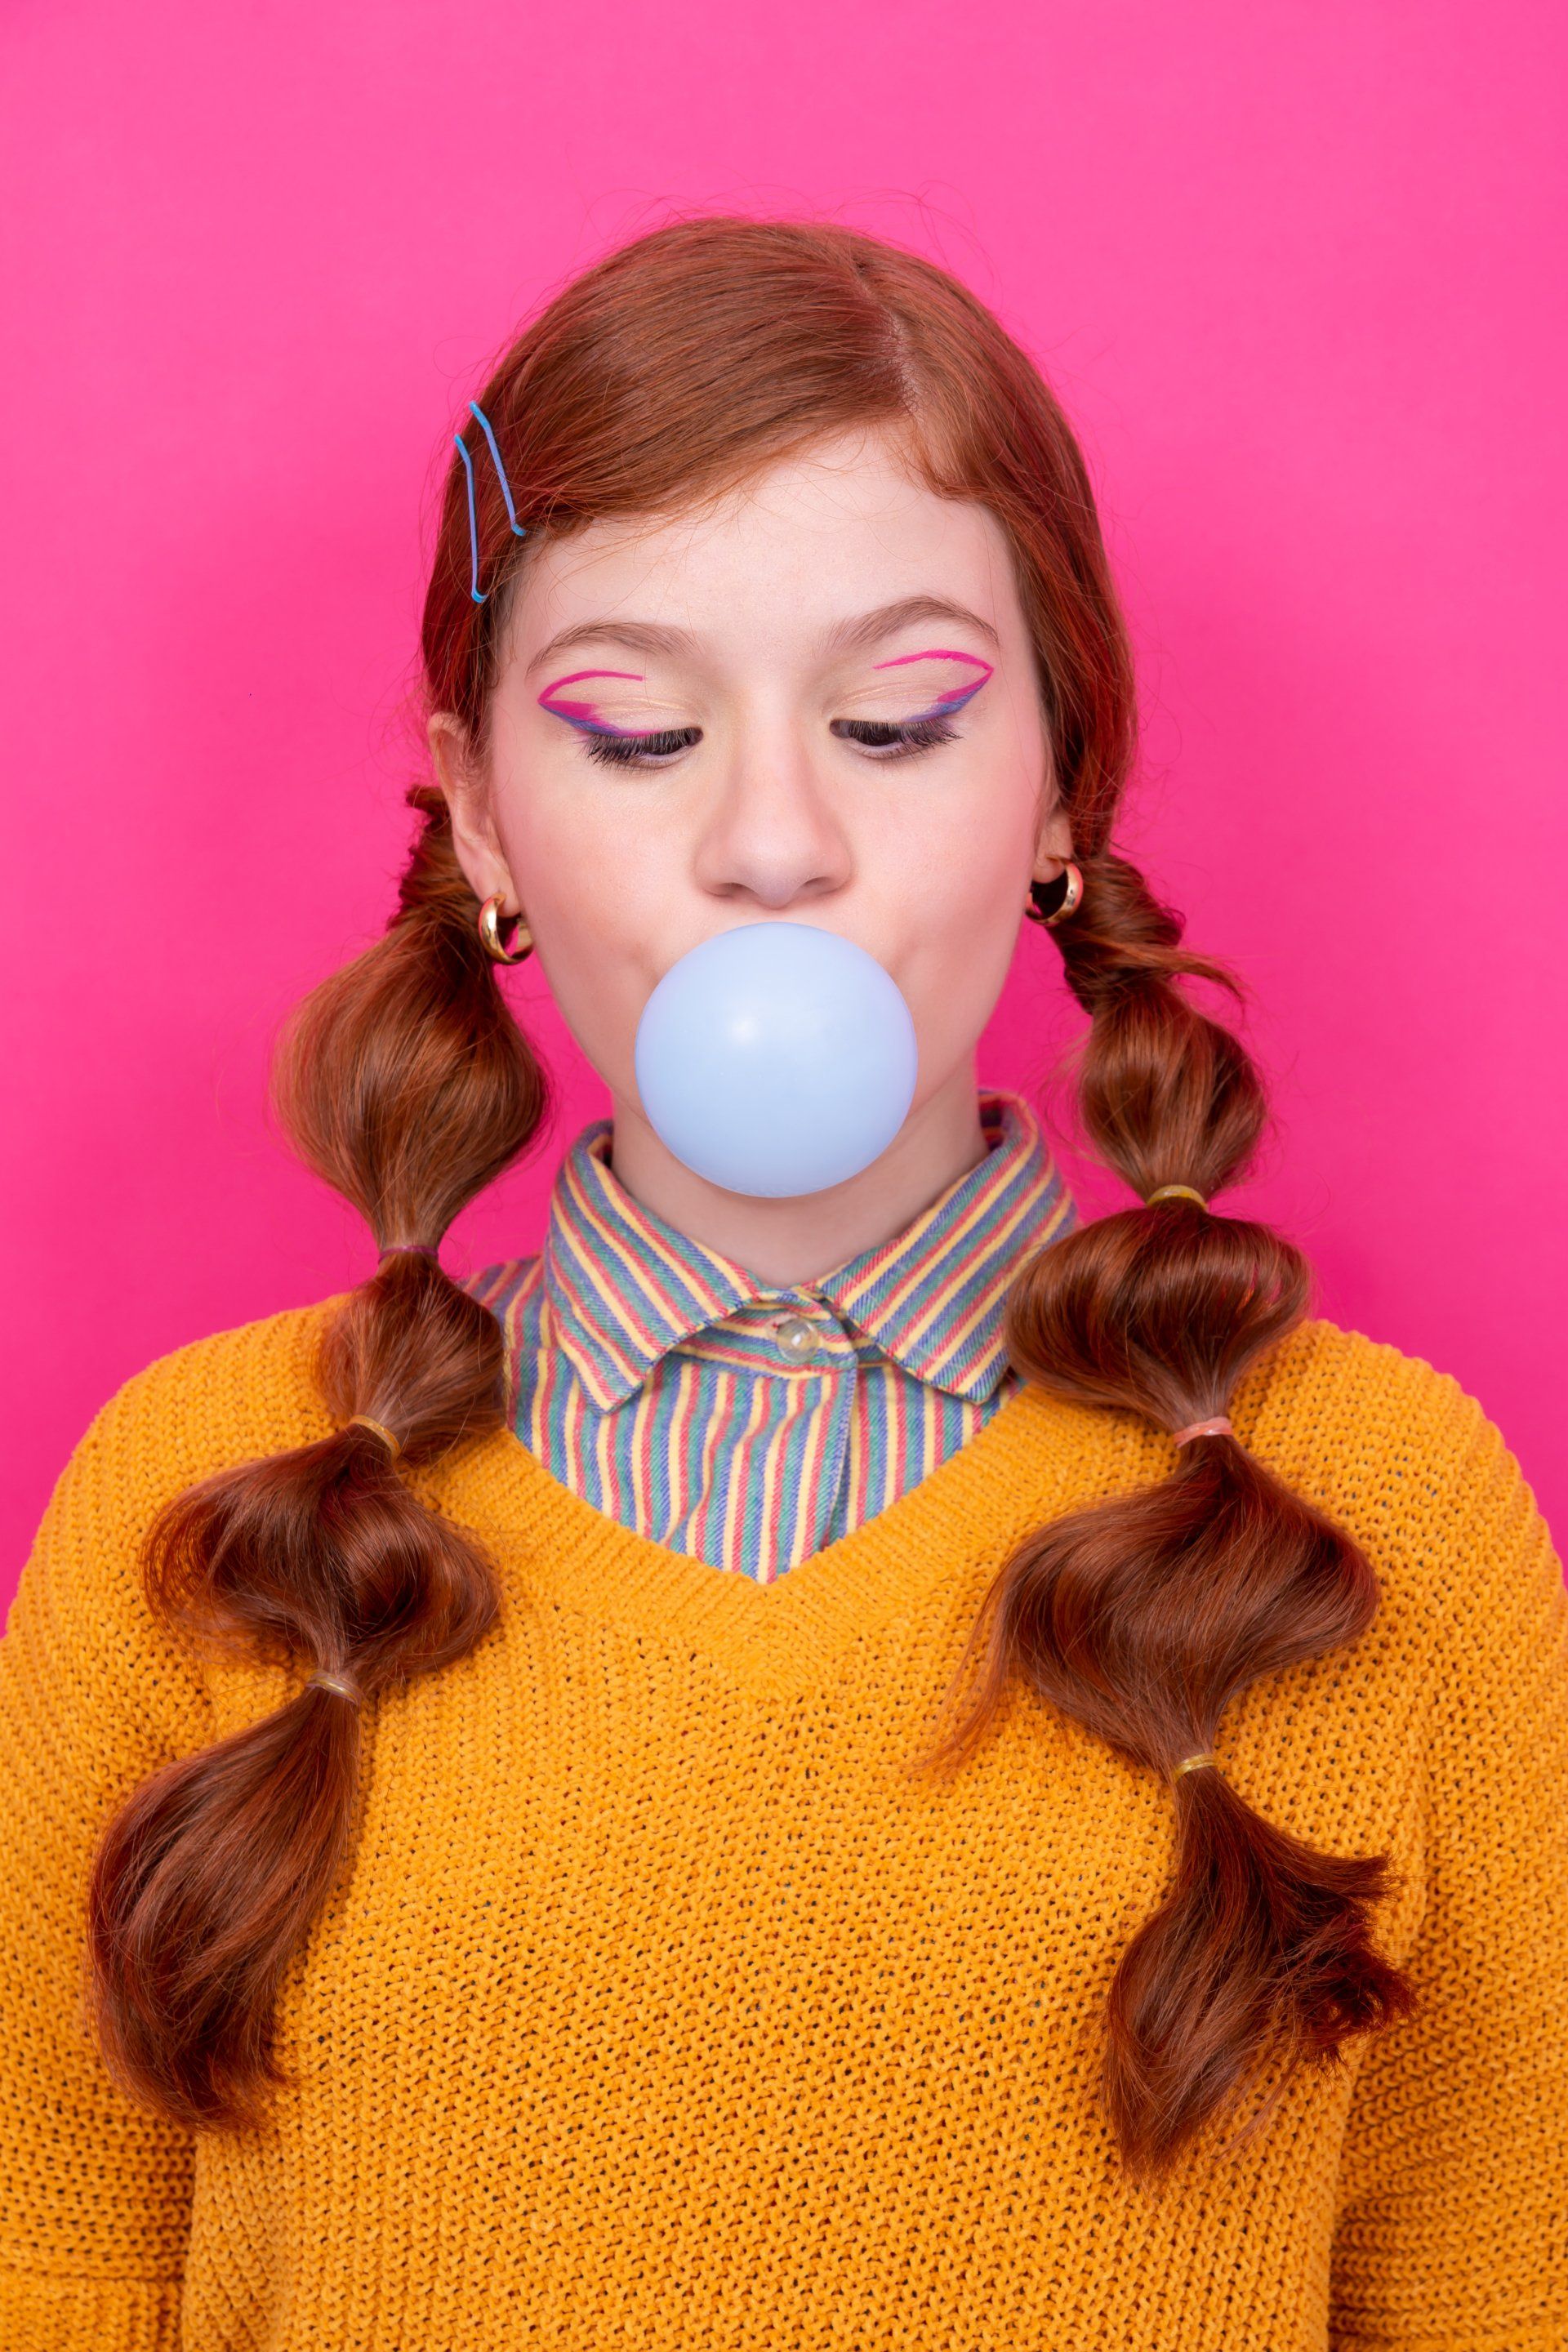 Infographic: 6 Surprising Health Benefits of Chewing Gum